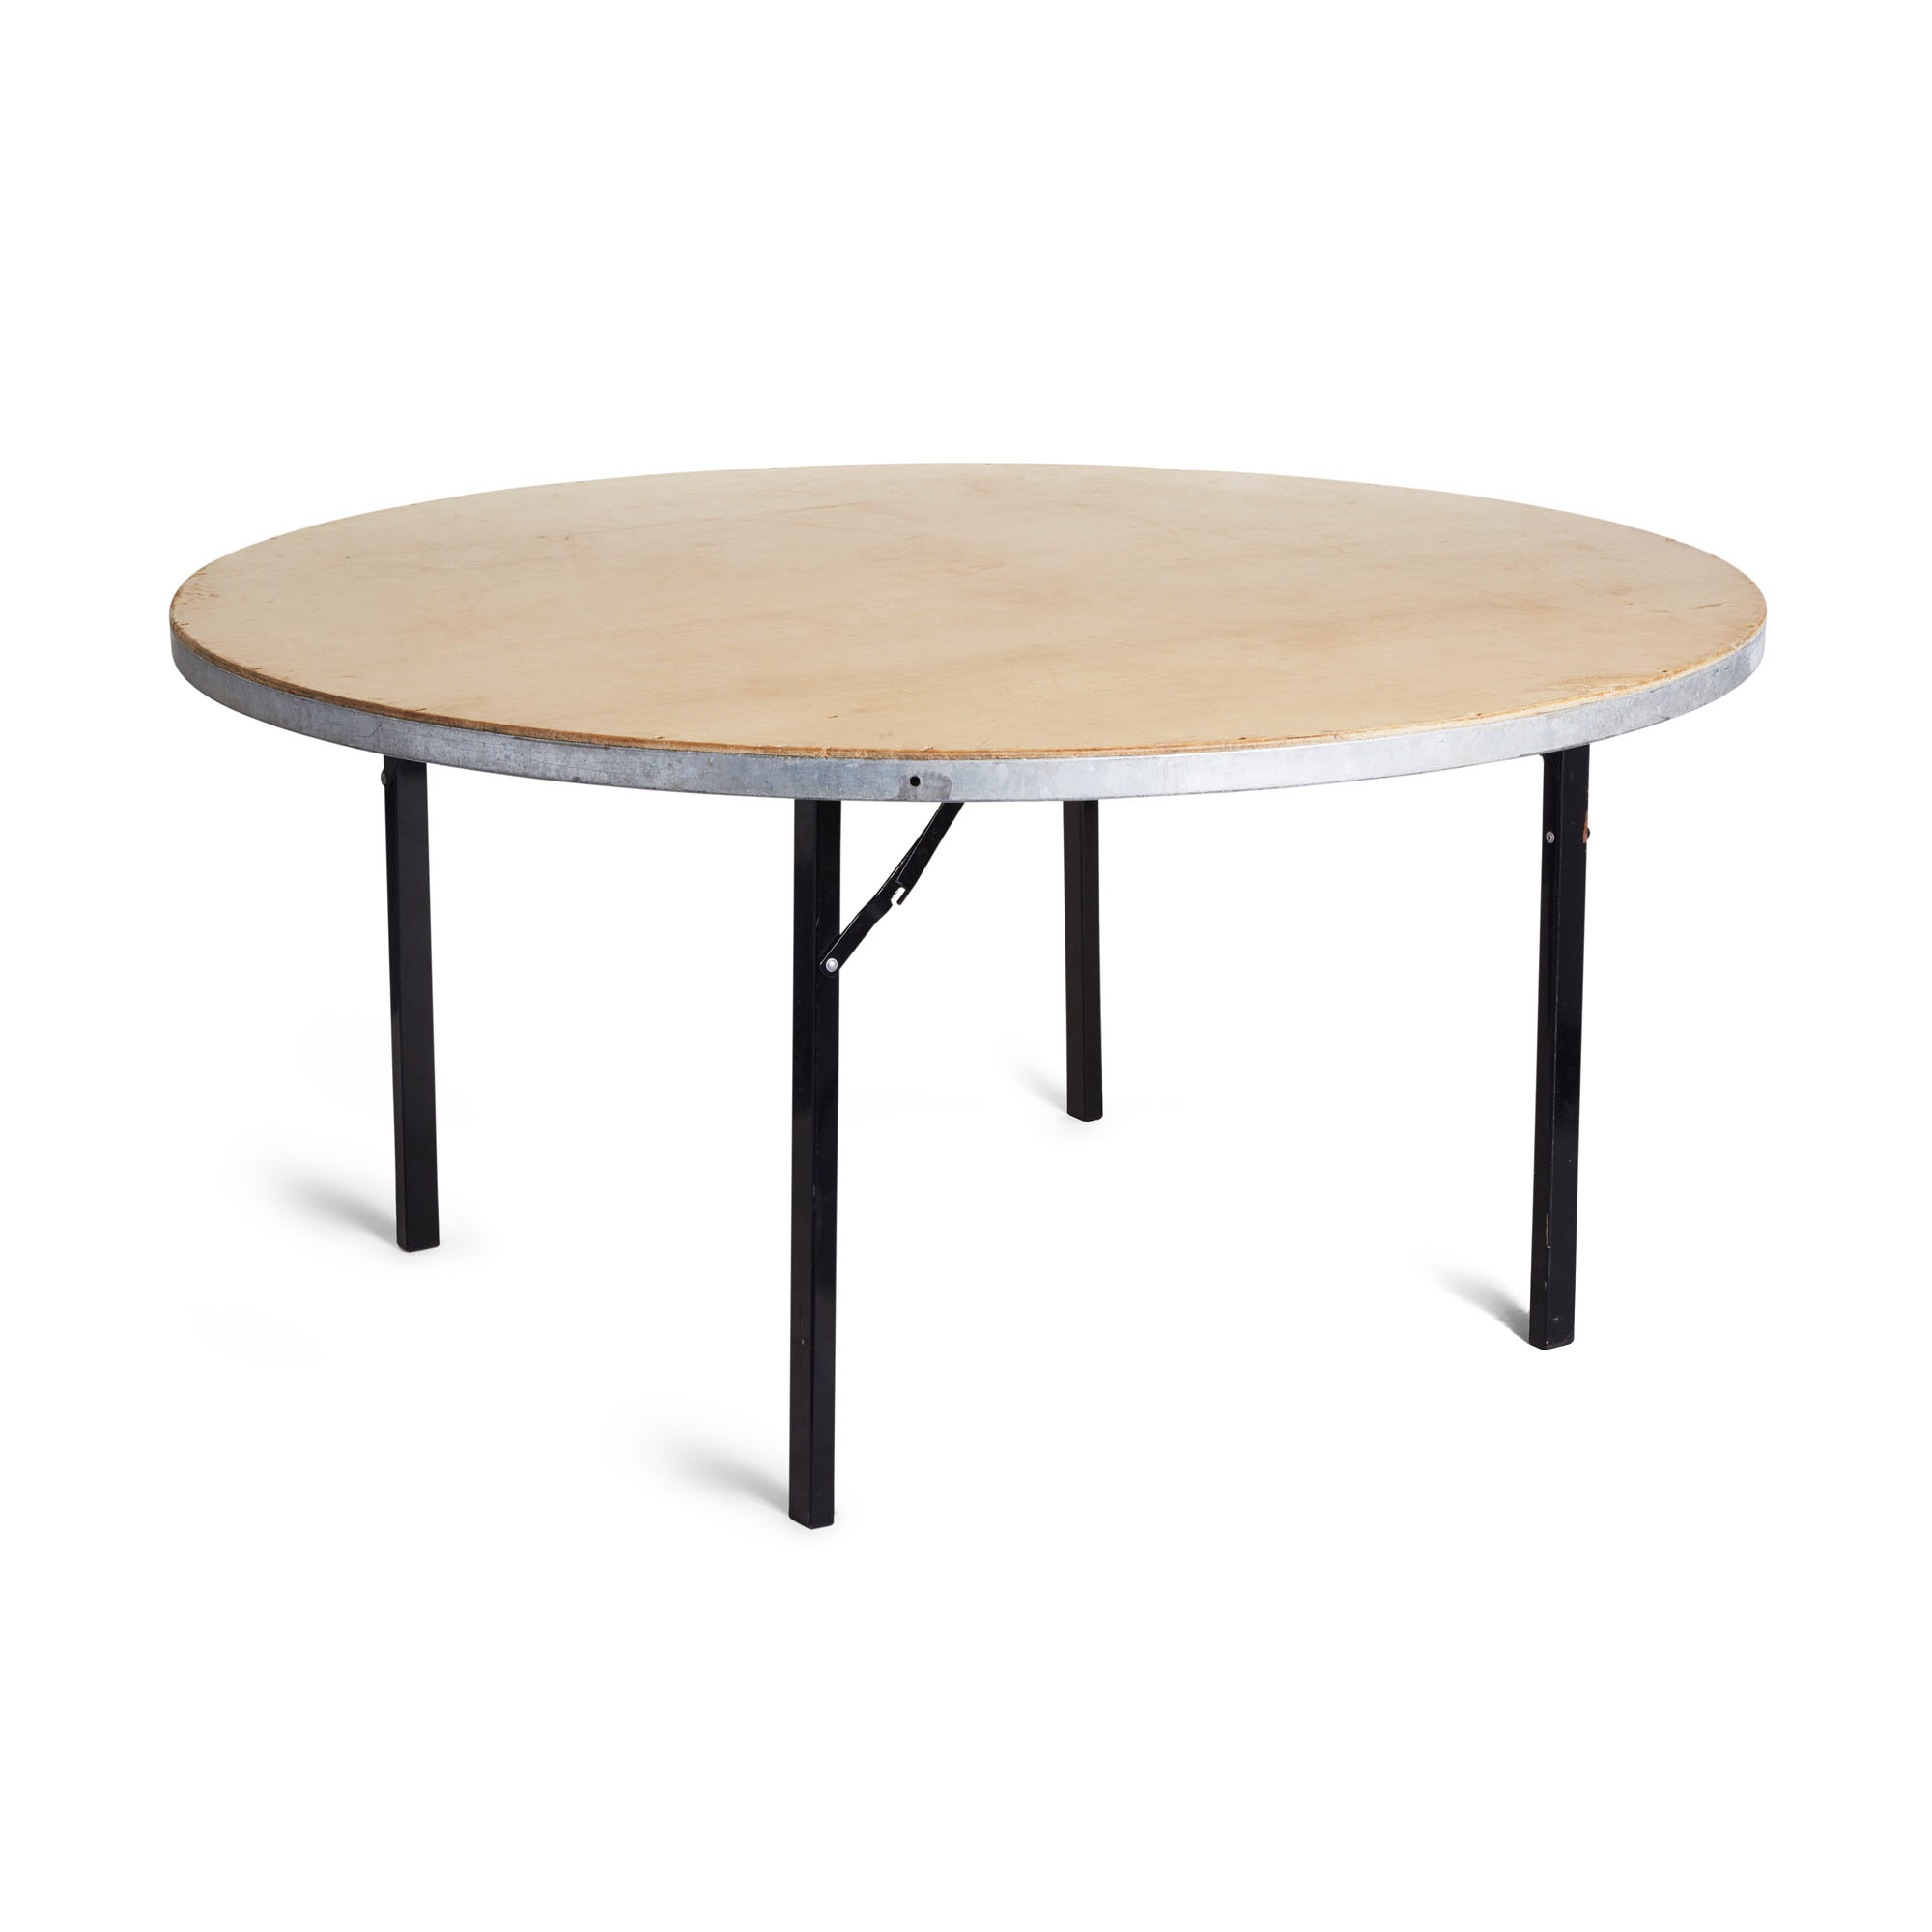 Banquet Small Round Table Seats 8 For, How Big Is A Banquet Table That Seats 8